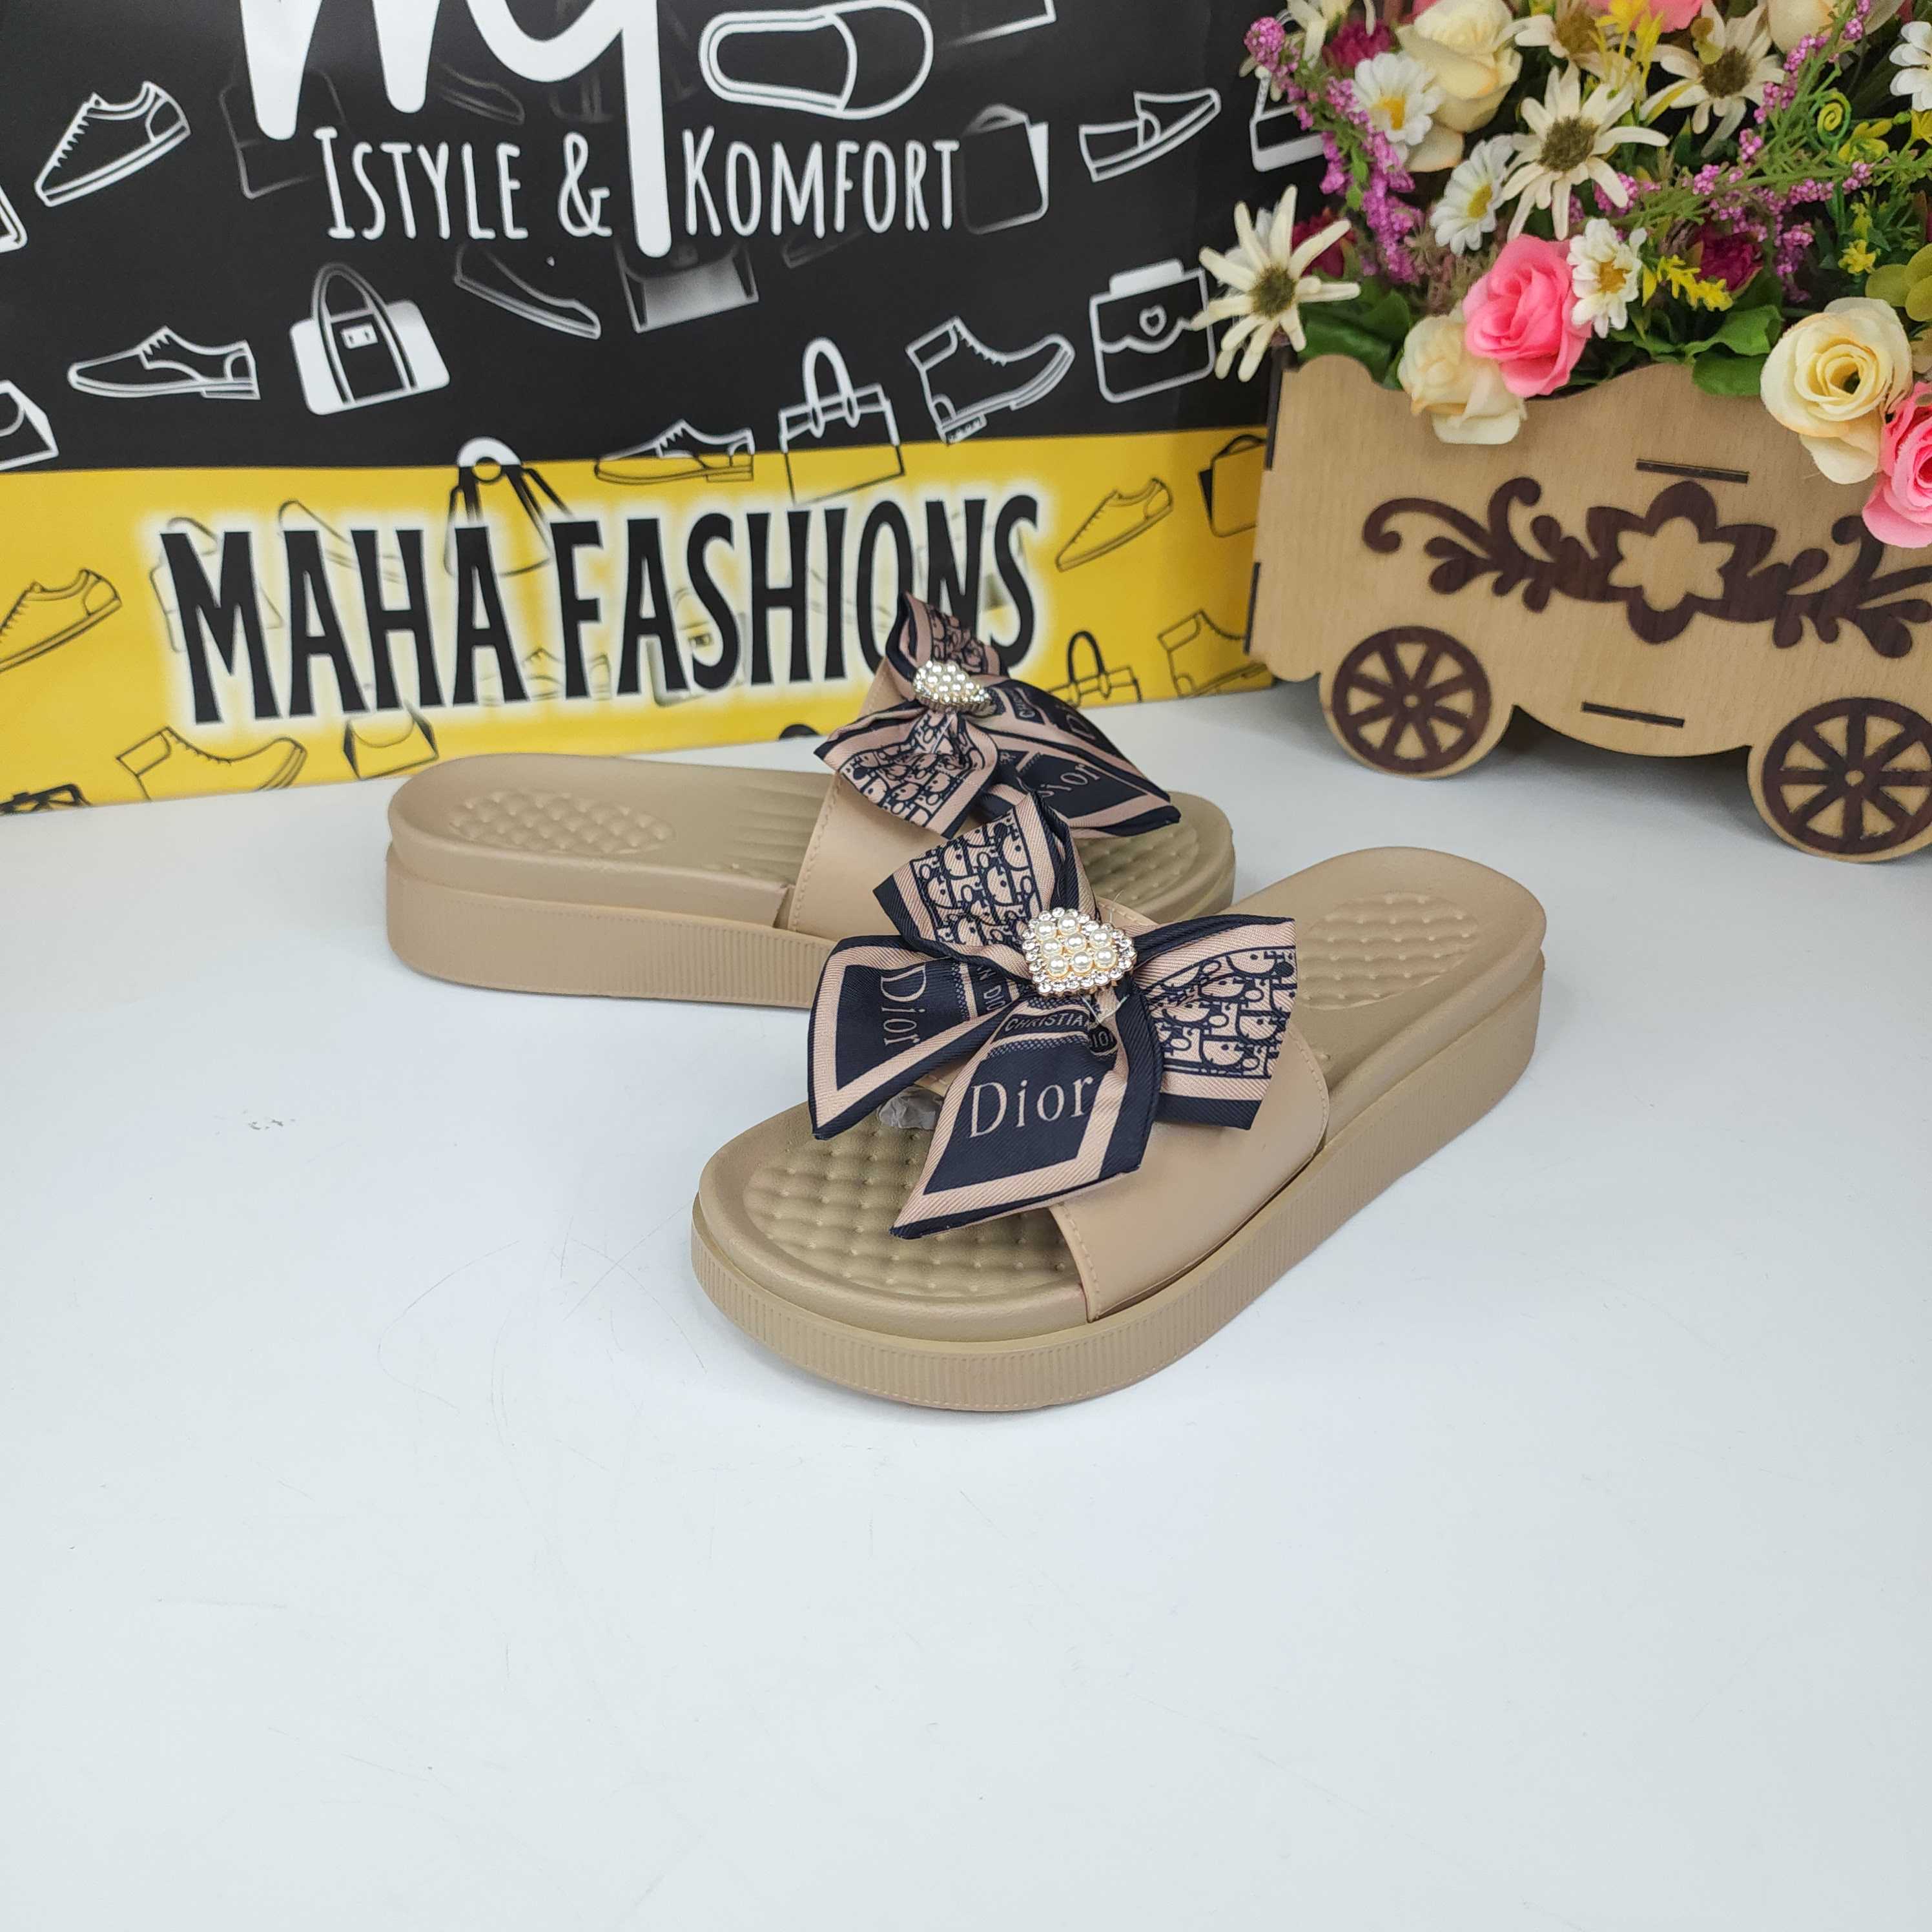 Brown Bow Slippers - Maha fashions -  